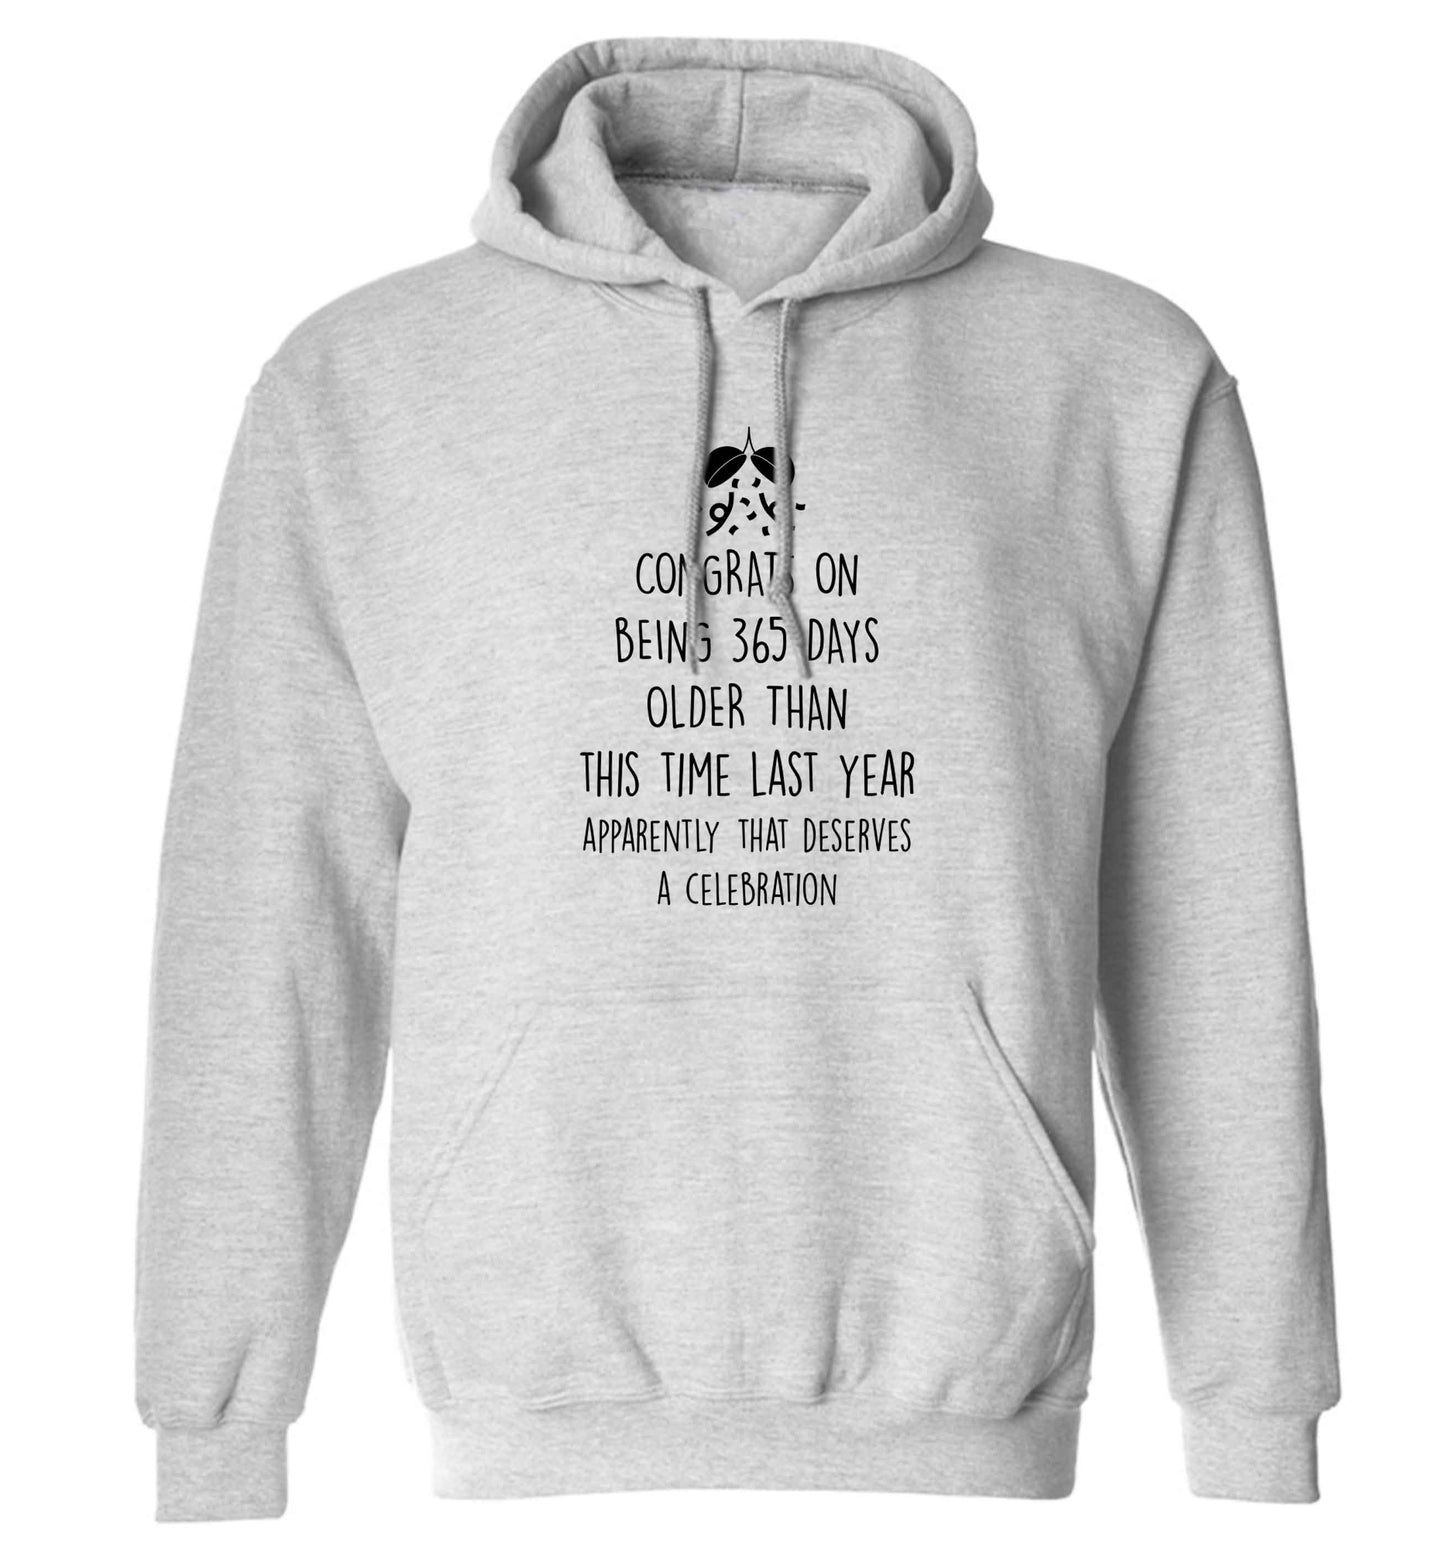 Congrats on being 365 days older than you were this time last year apparently that deserves a celebration adults unisex grey hoodie 2XL